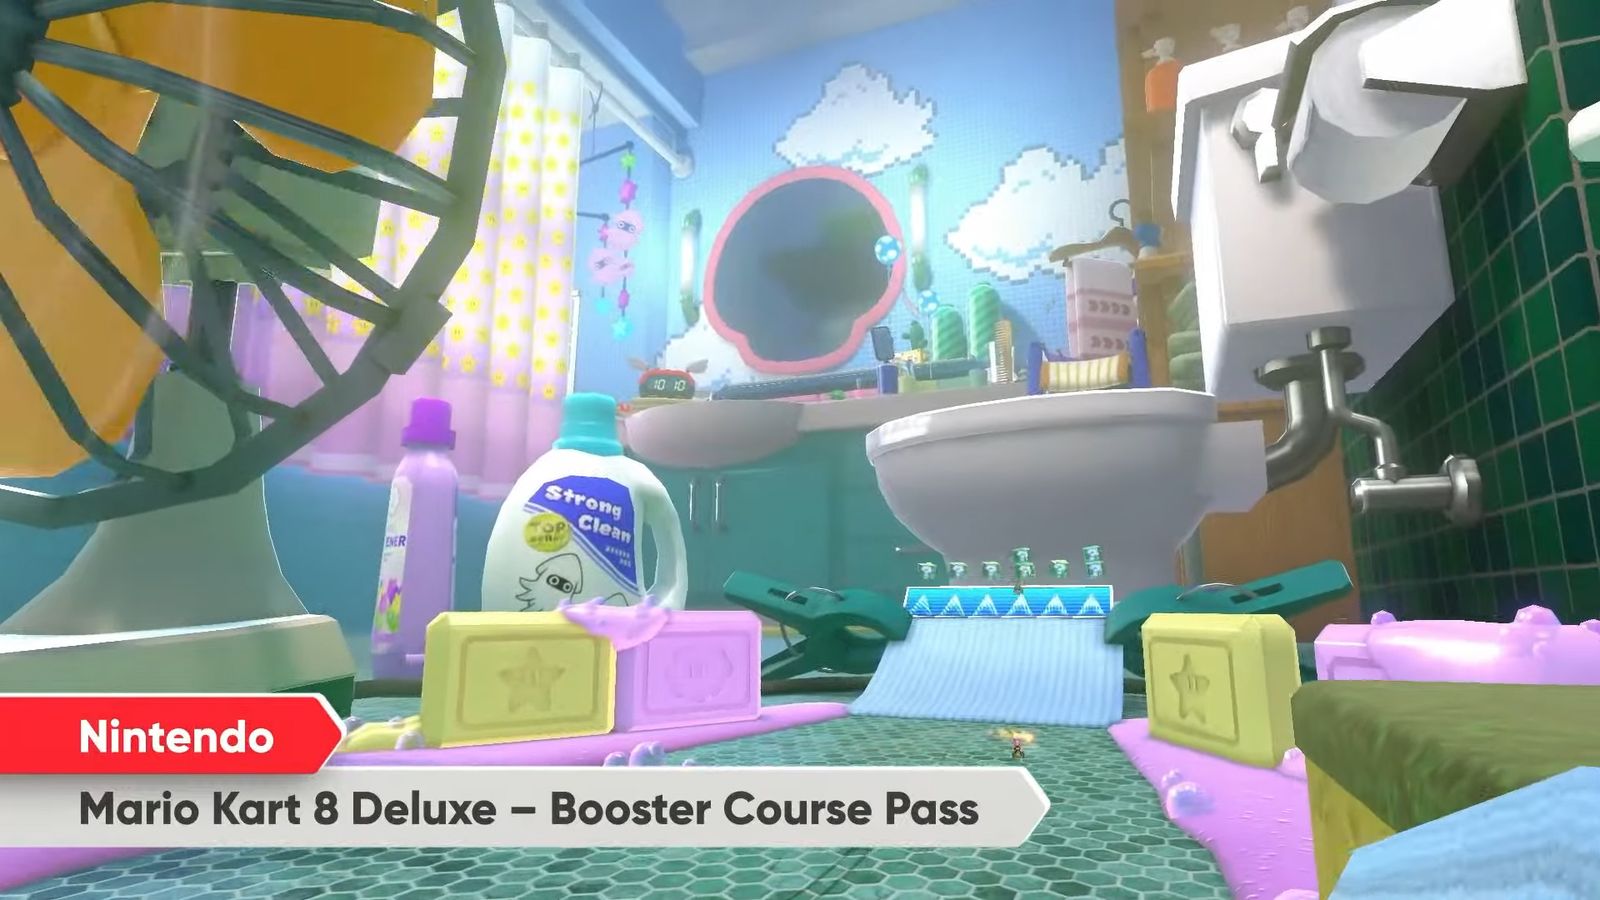 Mario Kart 8 Deluxe Booster Course Wave 5 Squeaky Clean Sprint